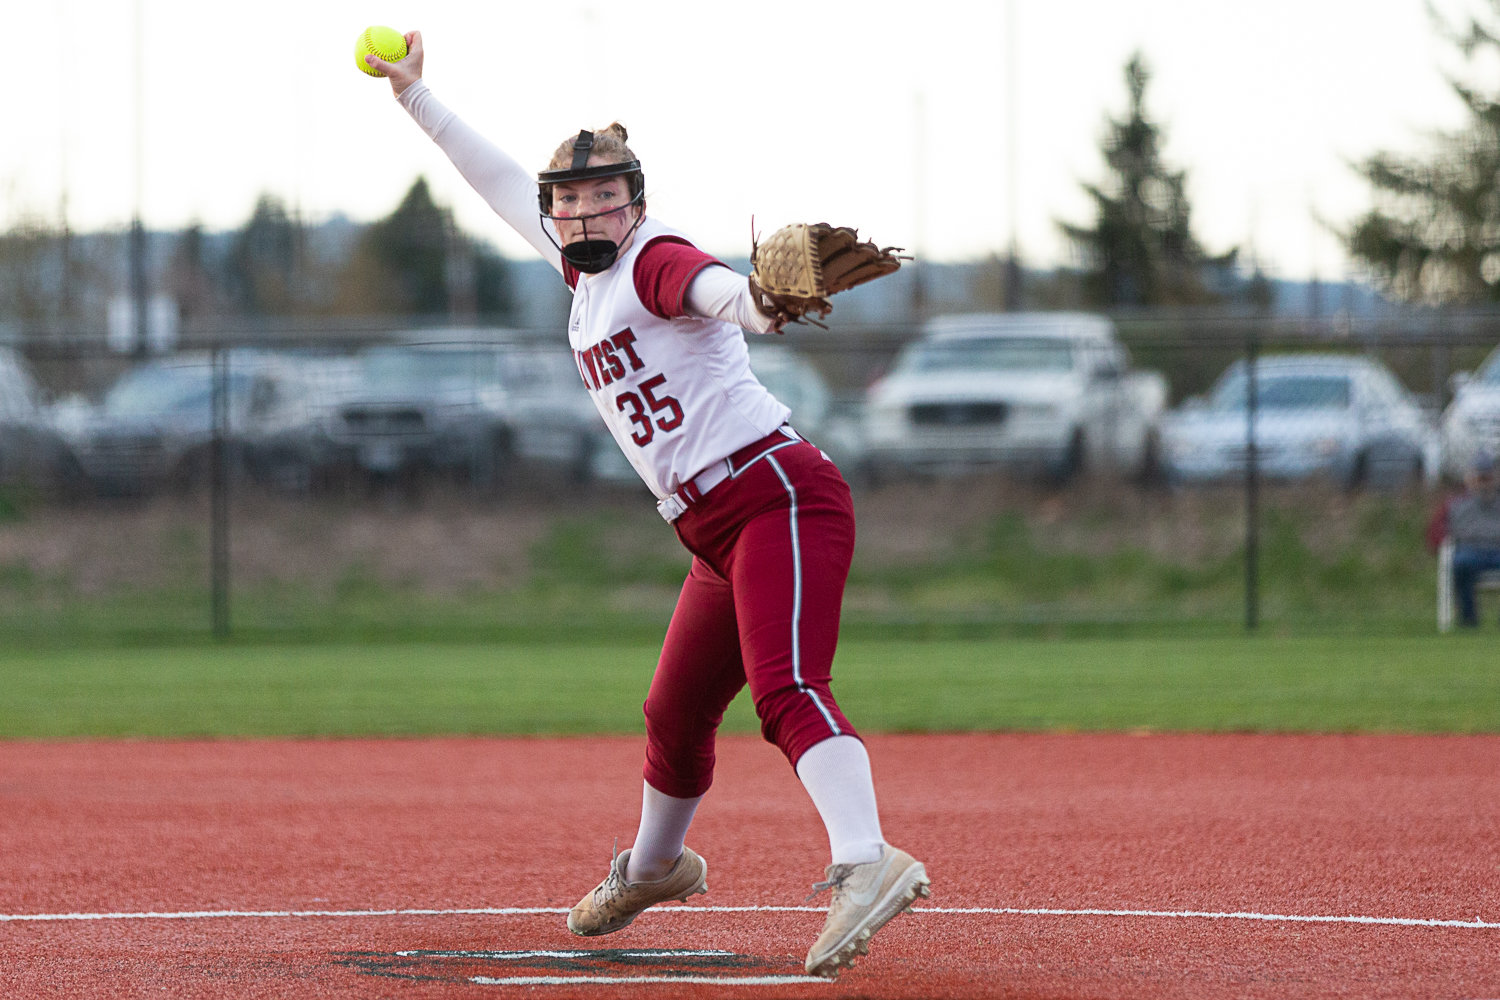 Ella Young fires a pitch during W.F. West's 3-2 win over Tumwater on March 22.